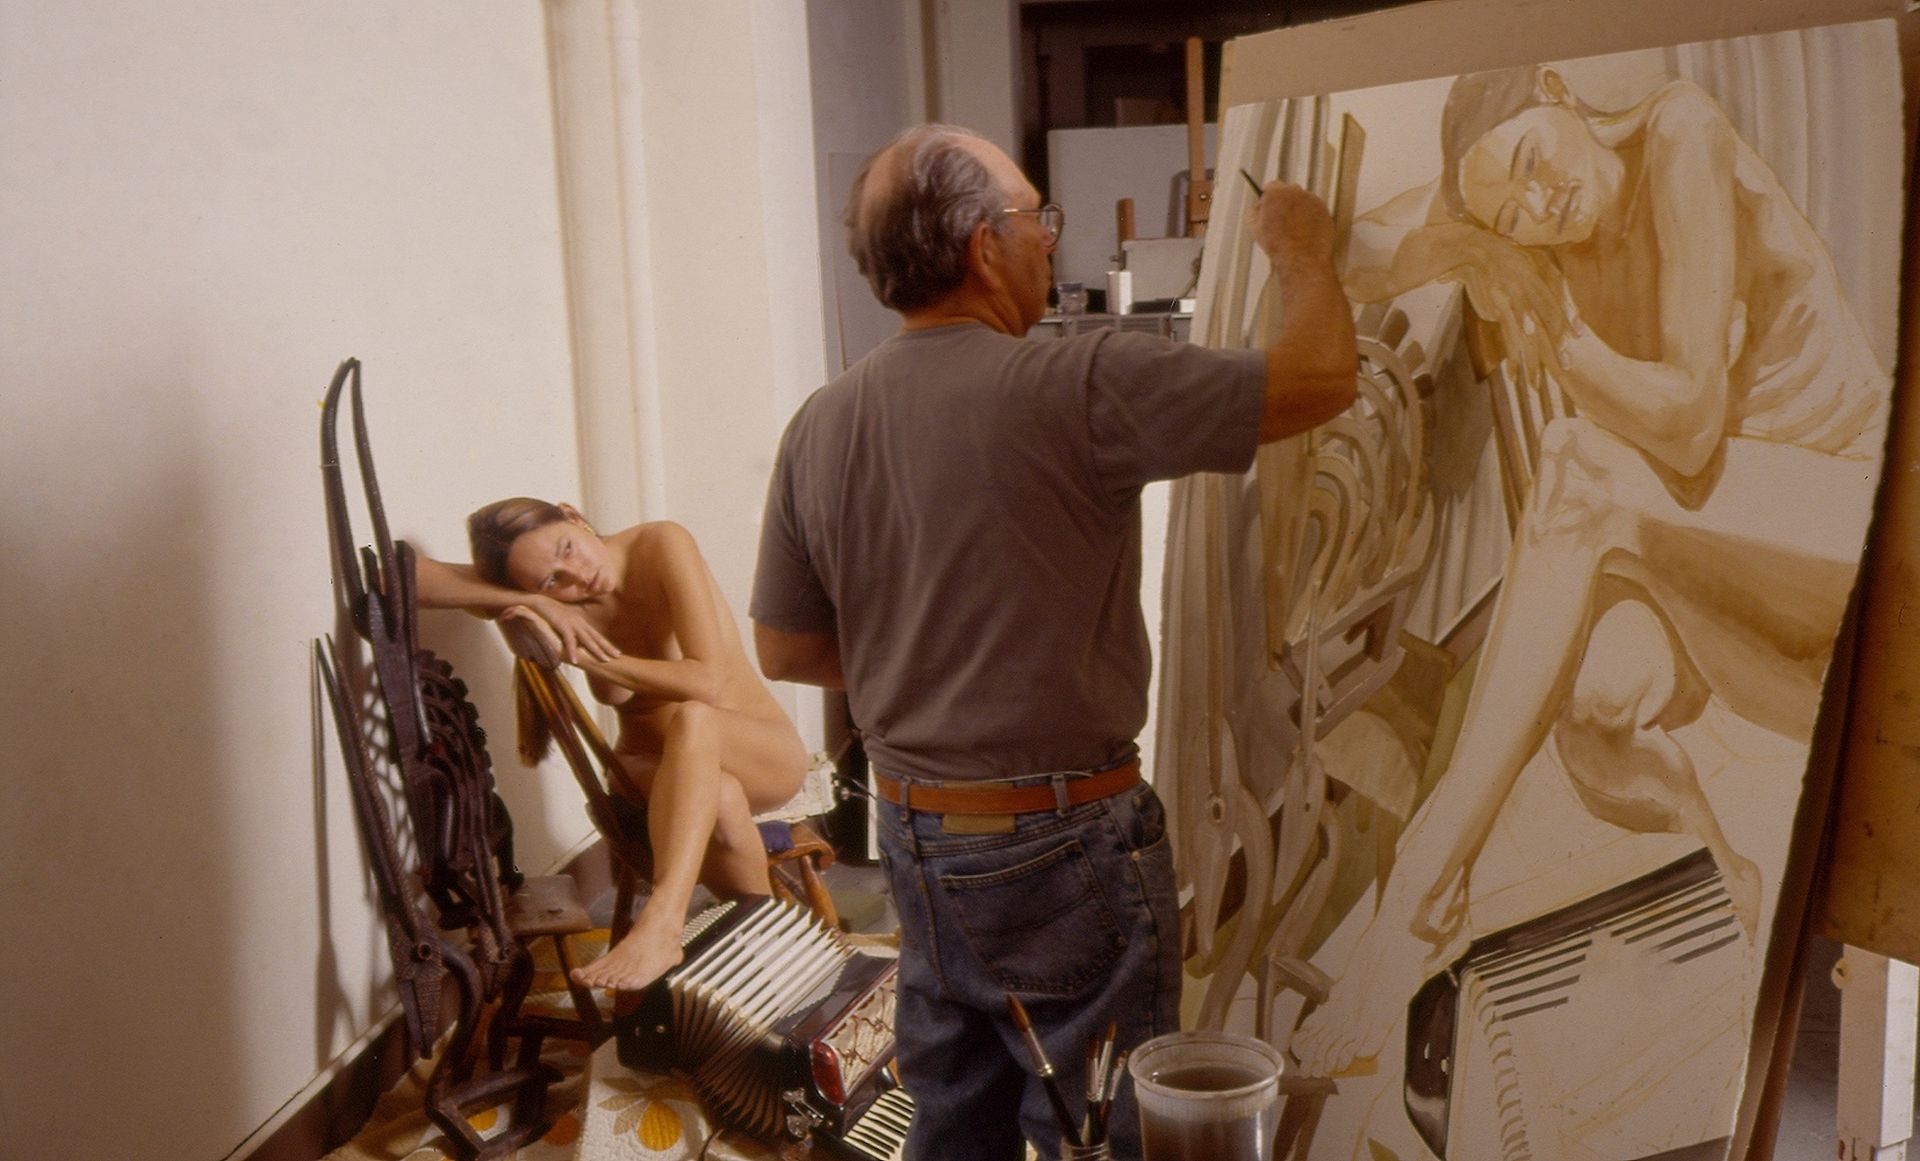 Philip Pearlstein painting a model in his studio in 1993 Jerry Thompson, courtesy Betty Cuningham Gallery